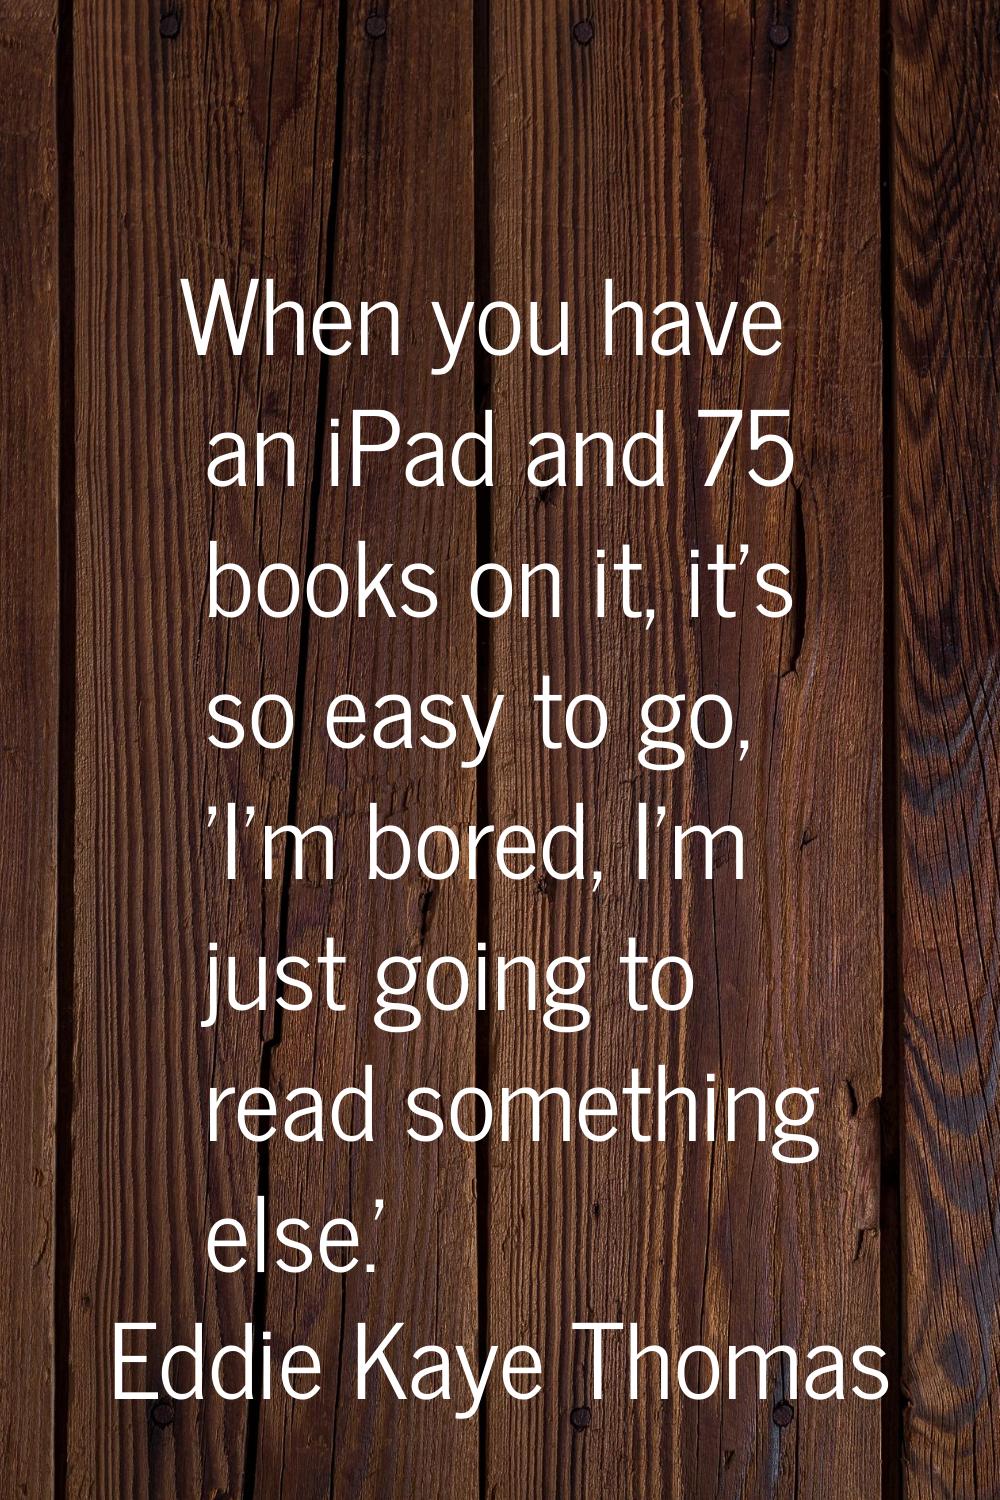 When you have an iPad and 75 books on it, it's so easy to go, 'I'm bored, I'm just going to read so